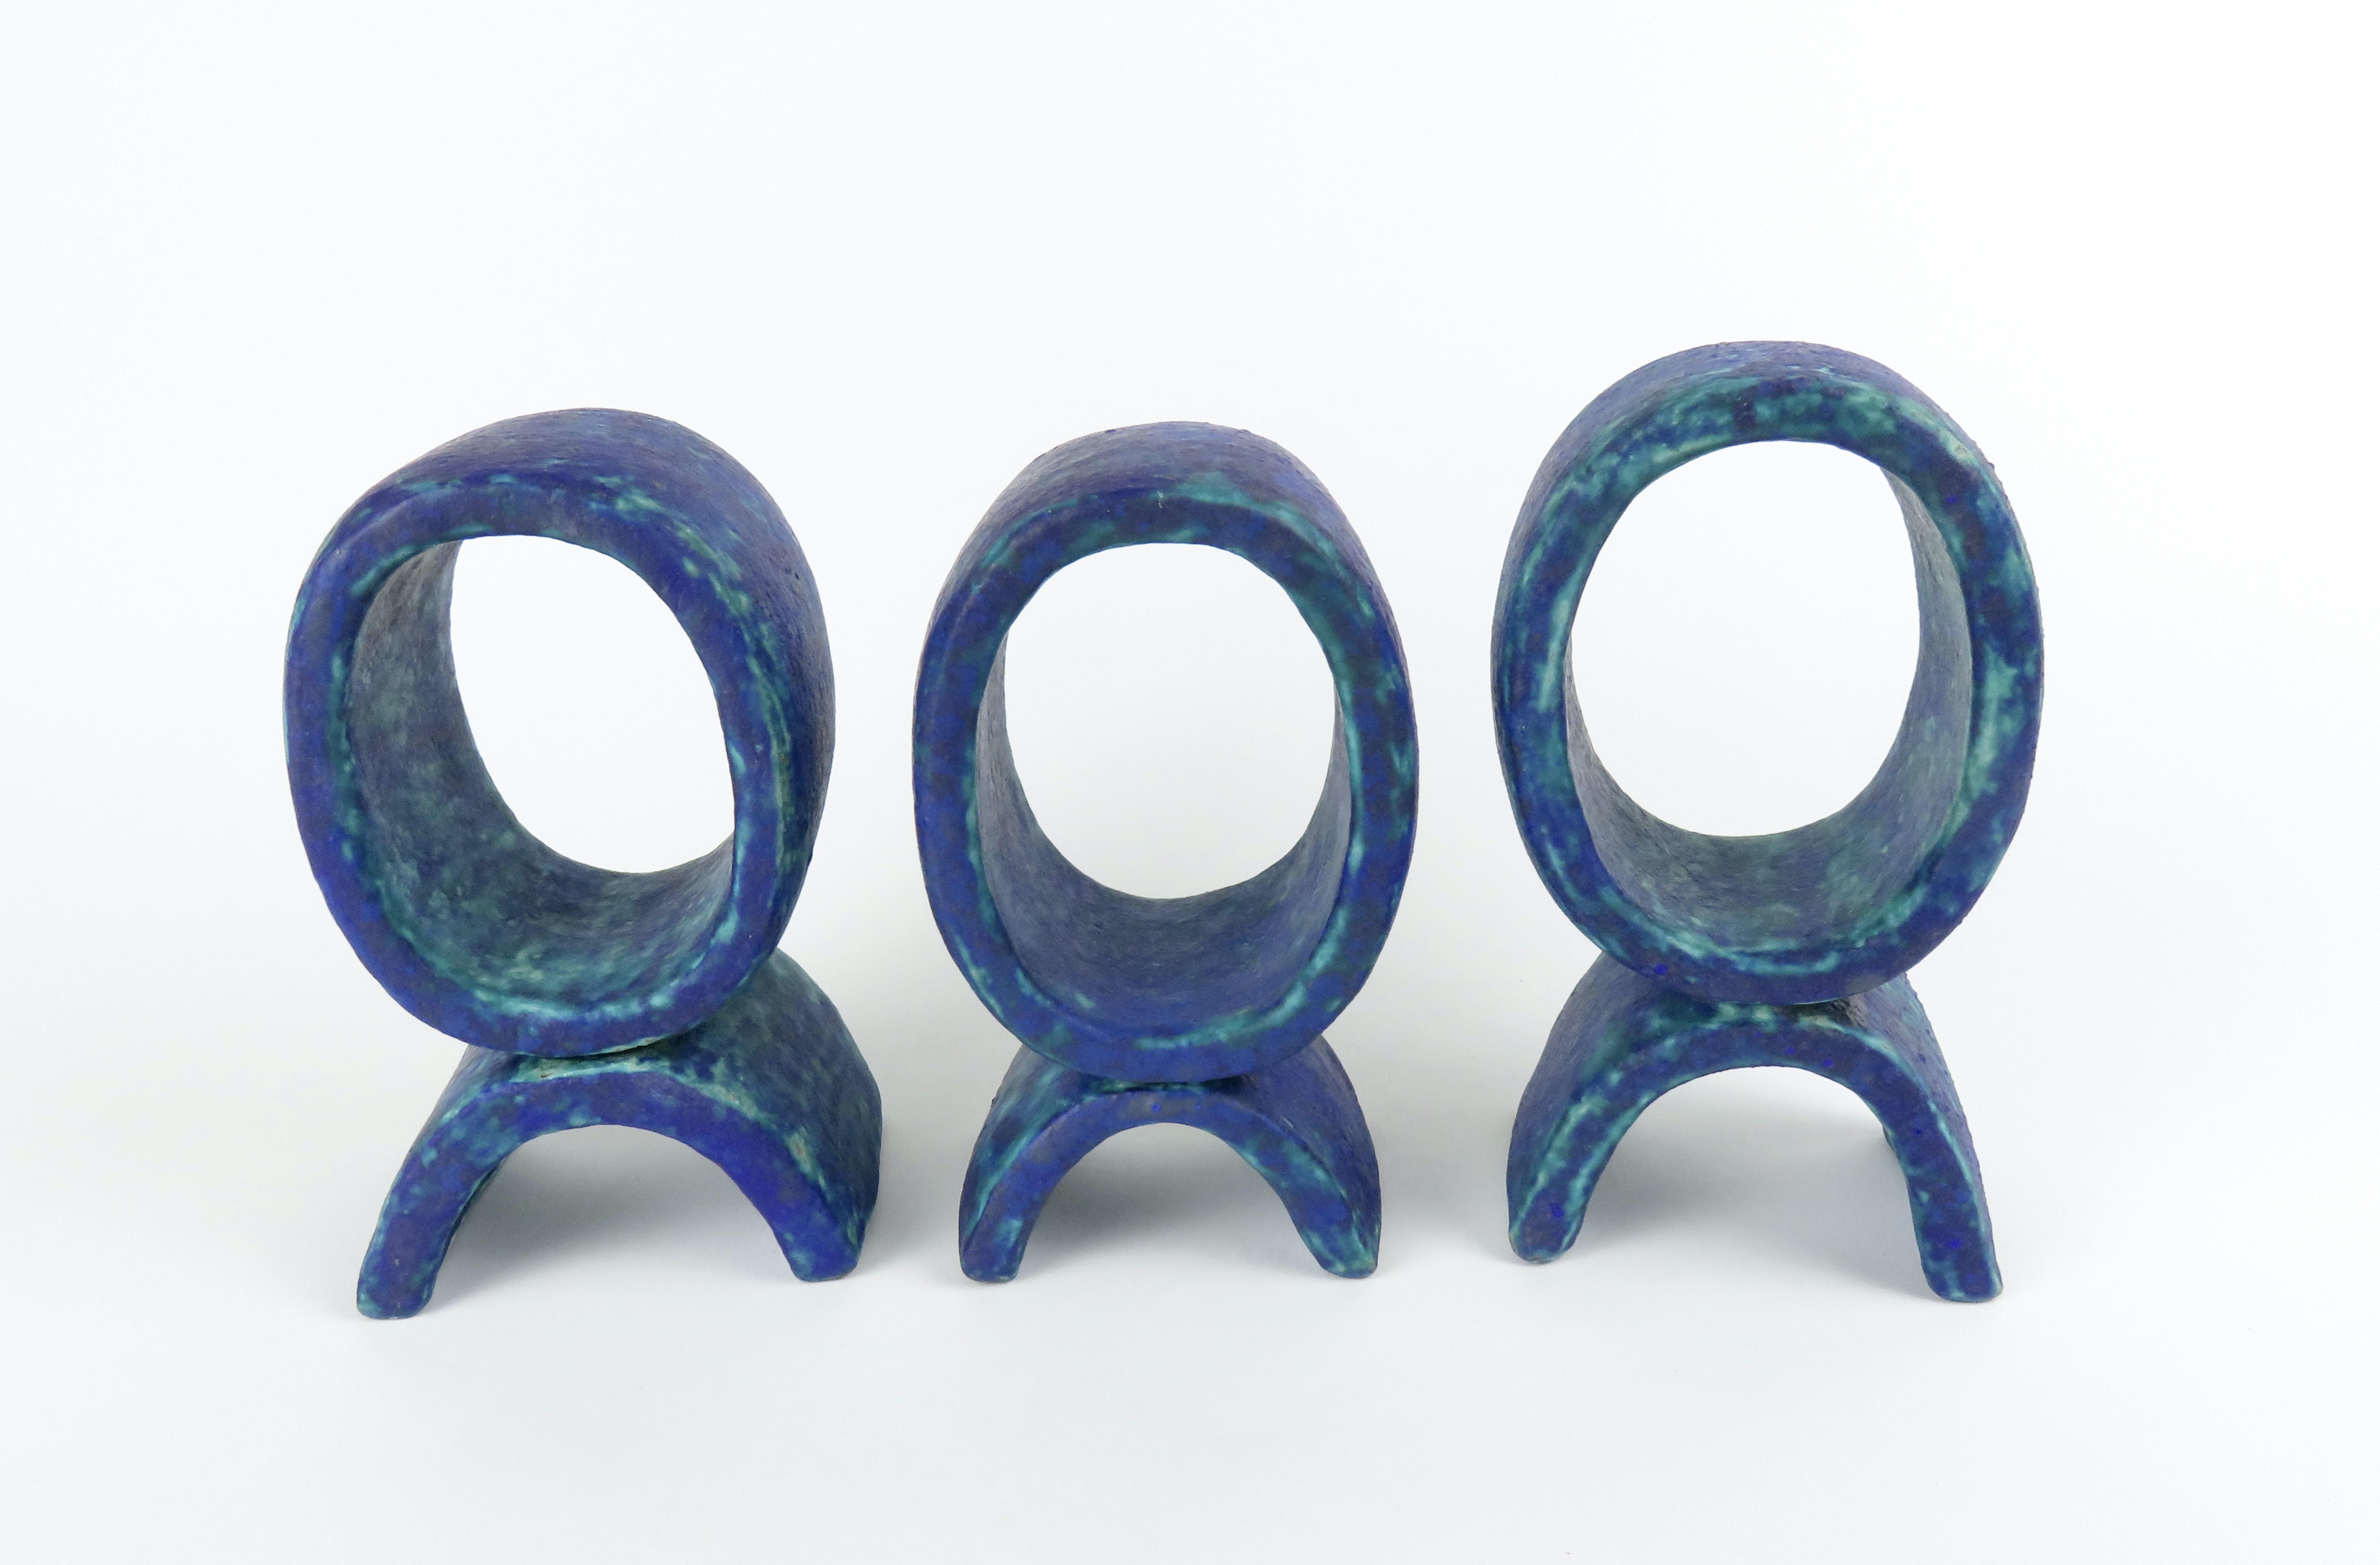 Organic Modern Mottled Turquoise and Deep Blue, 3 Ceramic Totems, Single Rings on Curved Legs For Sale